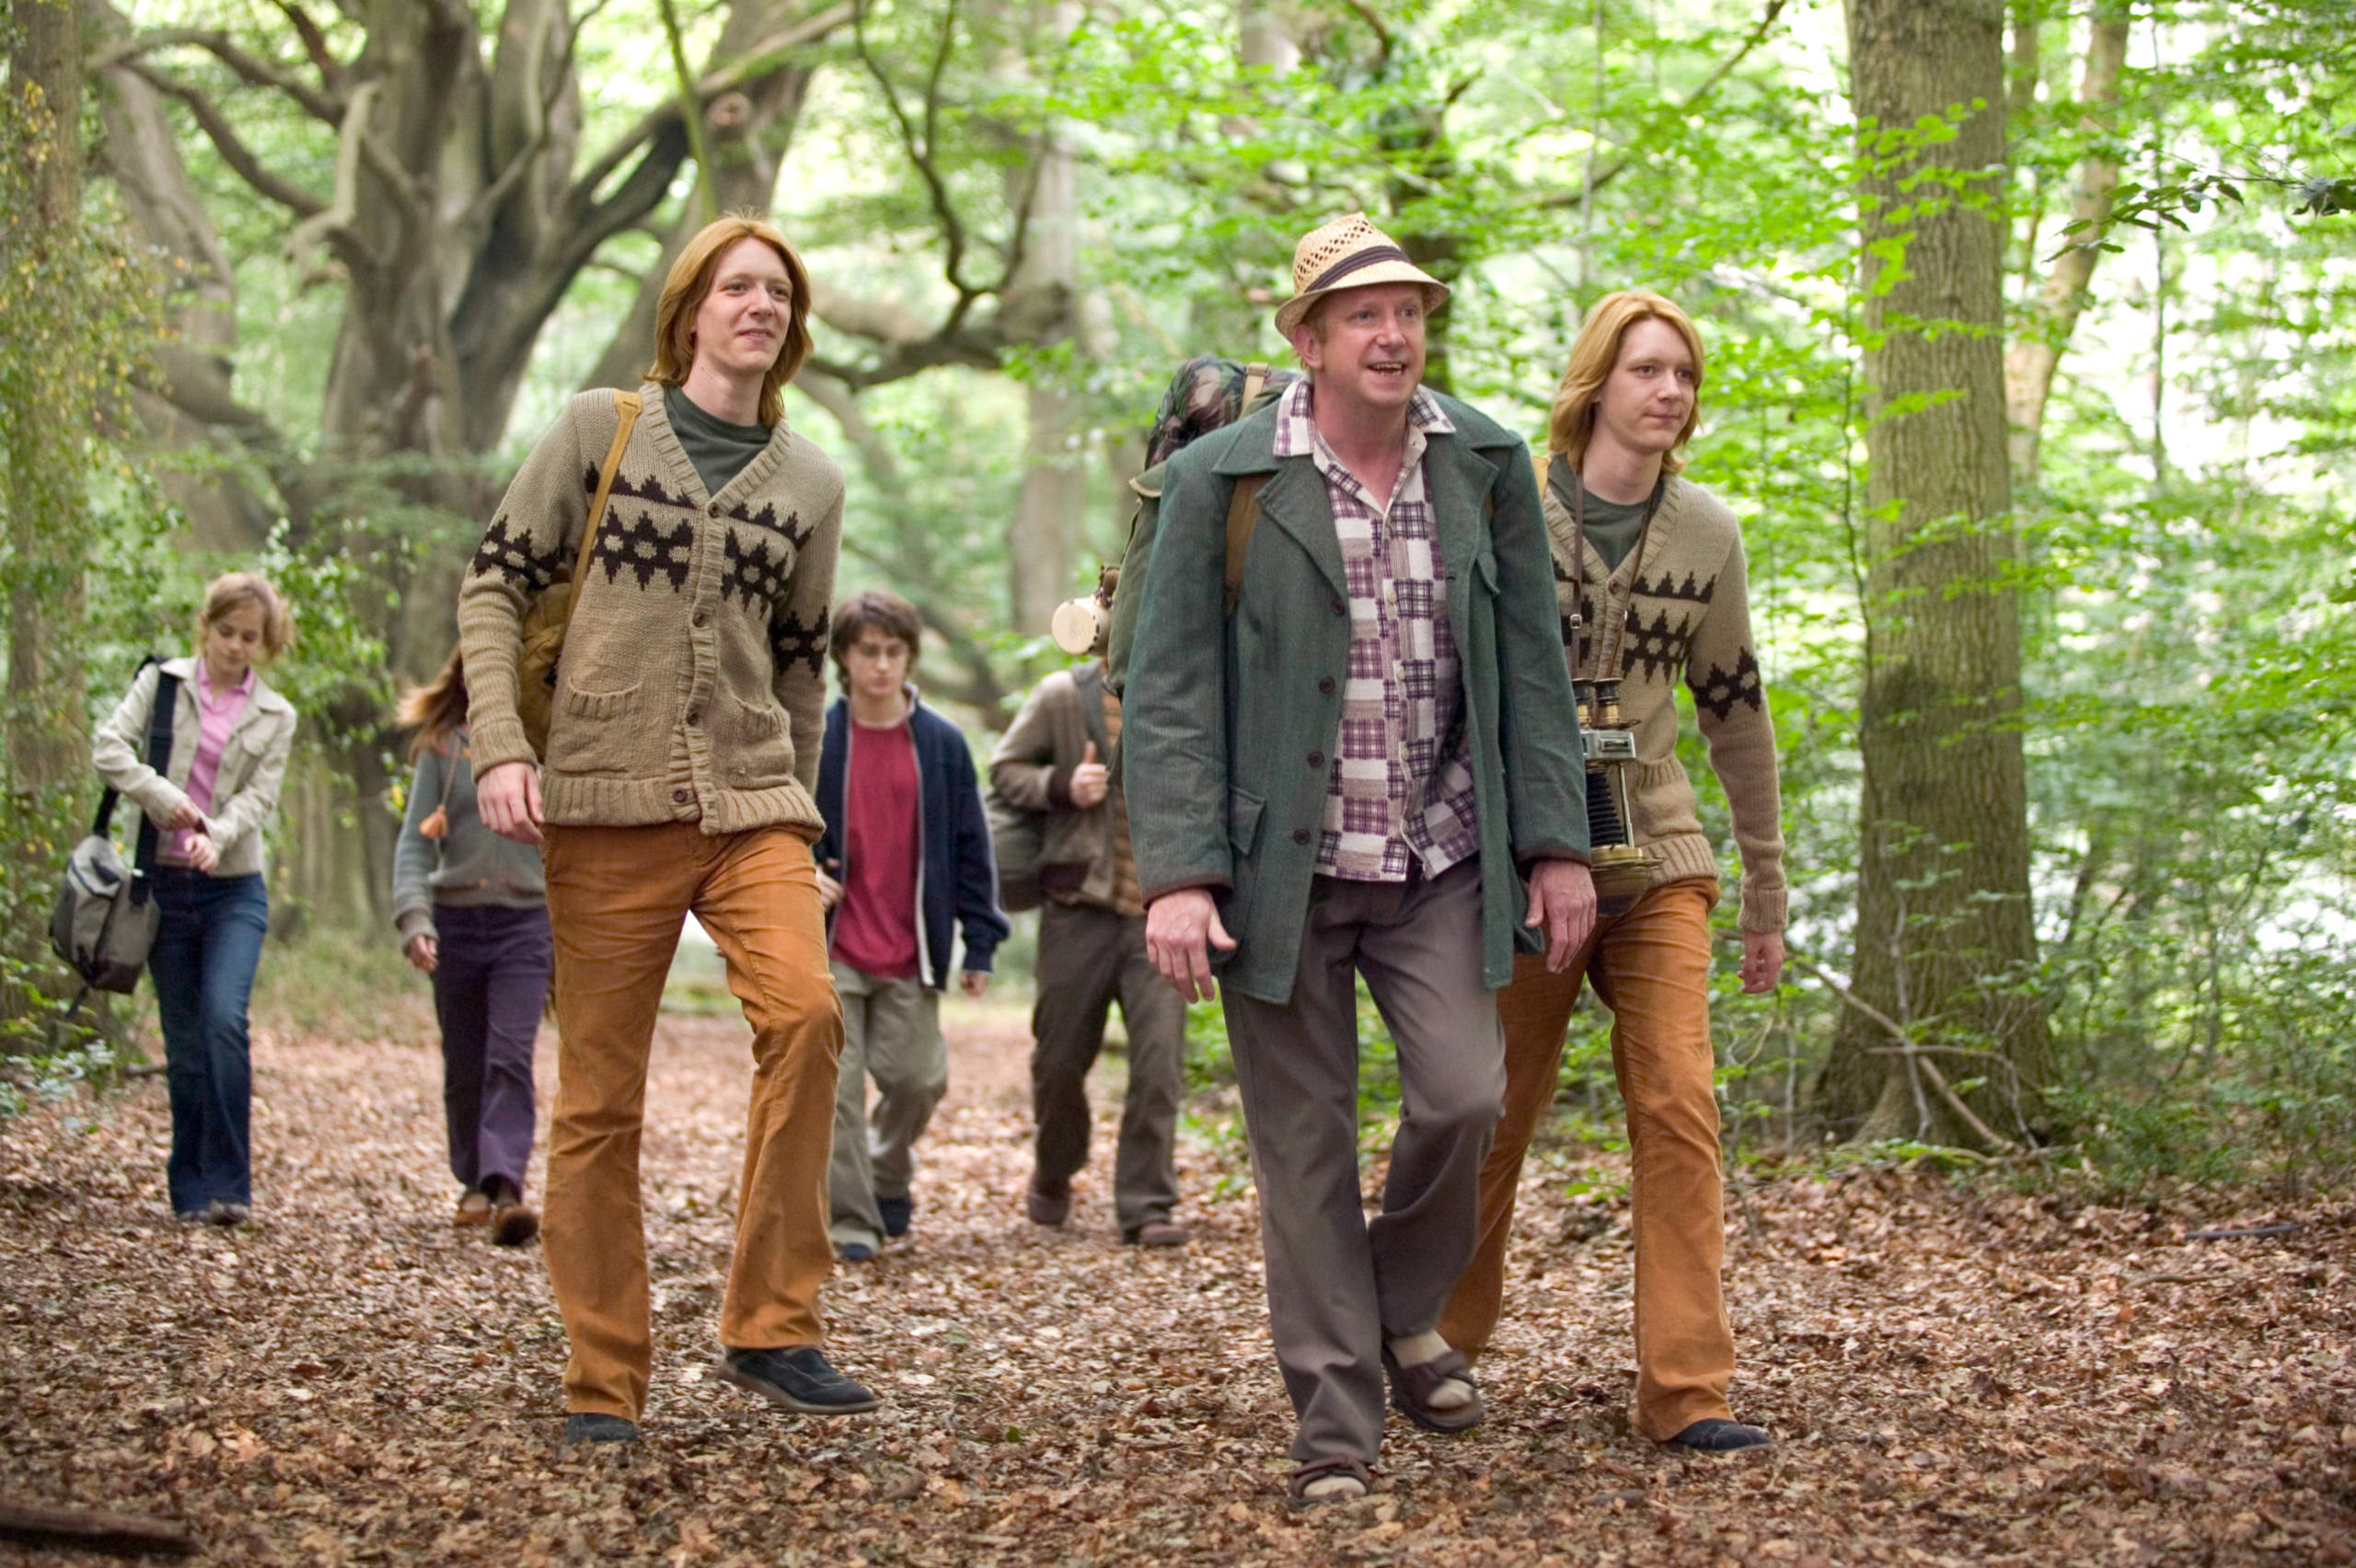 Arthur Weasley leads the group to the Portkey.